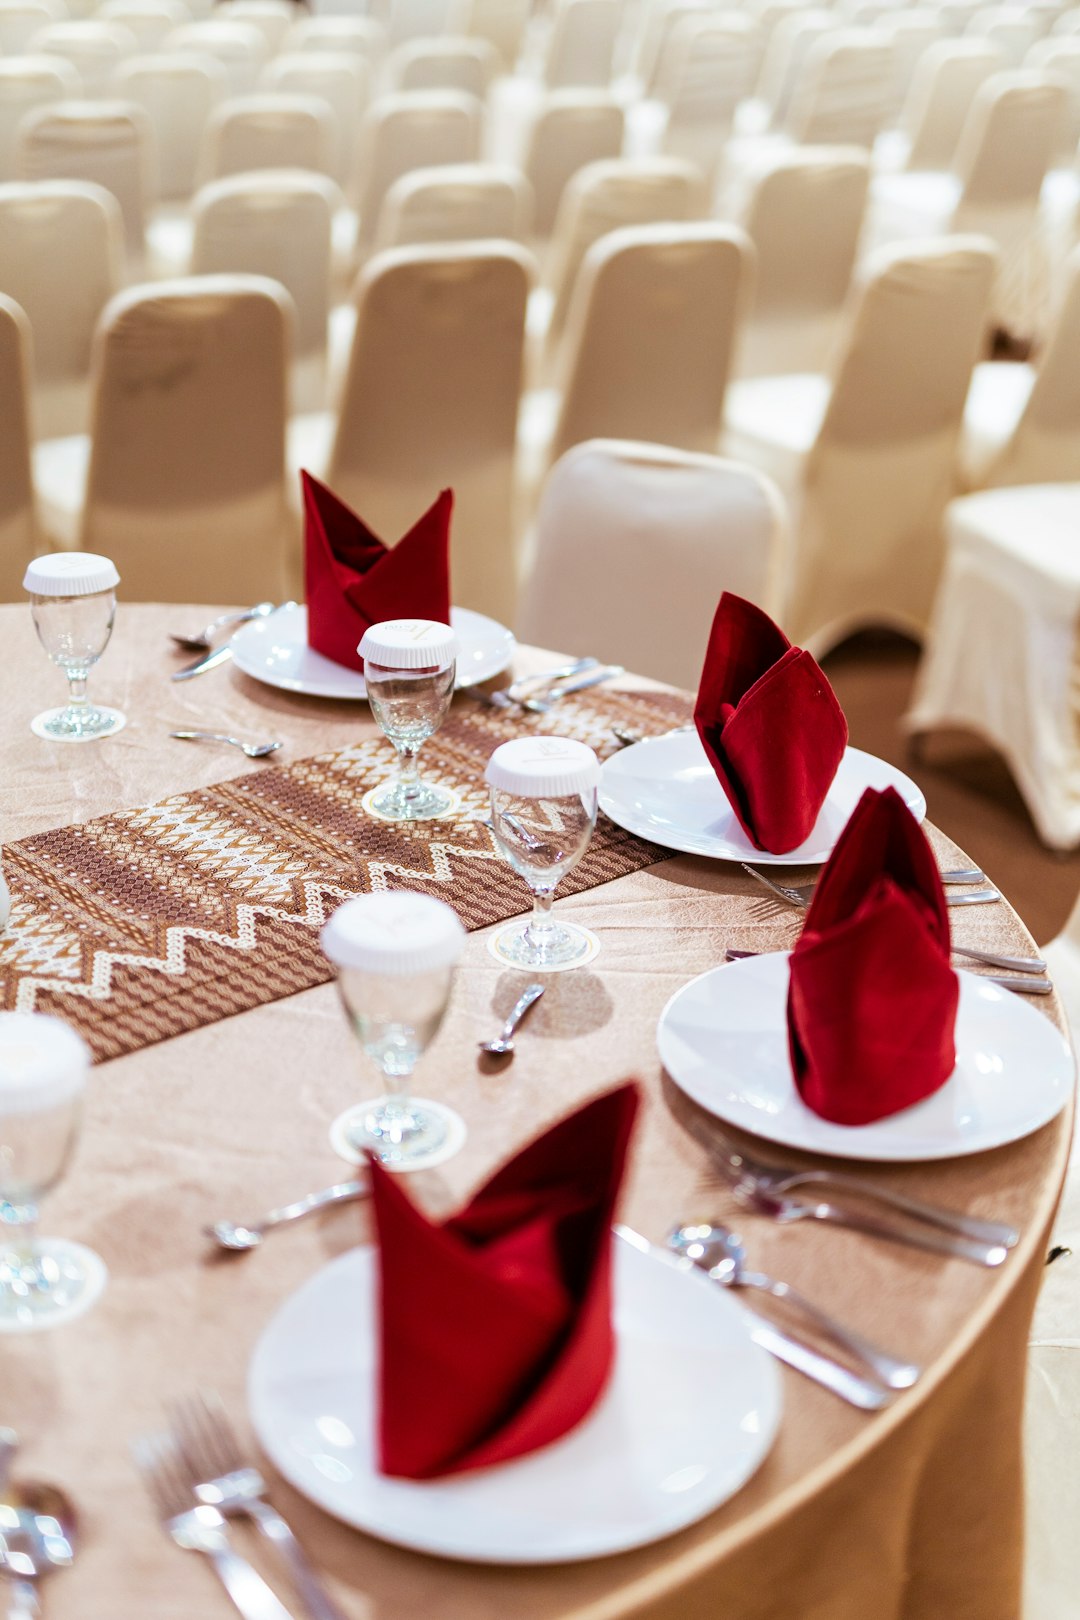 selective focus photography of red table napkins on white plates